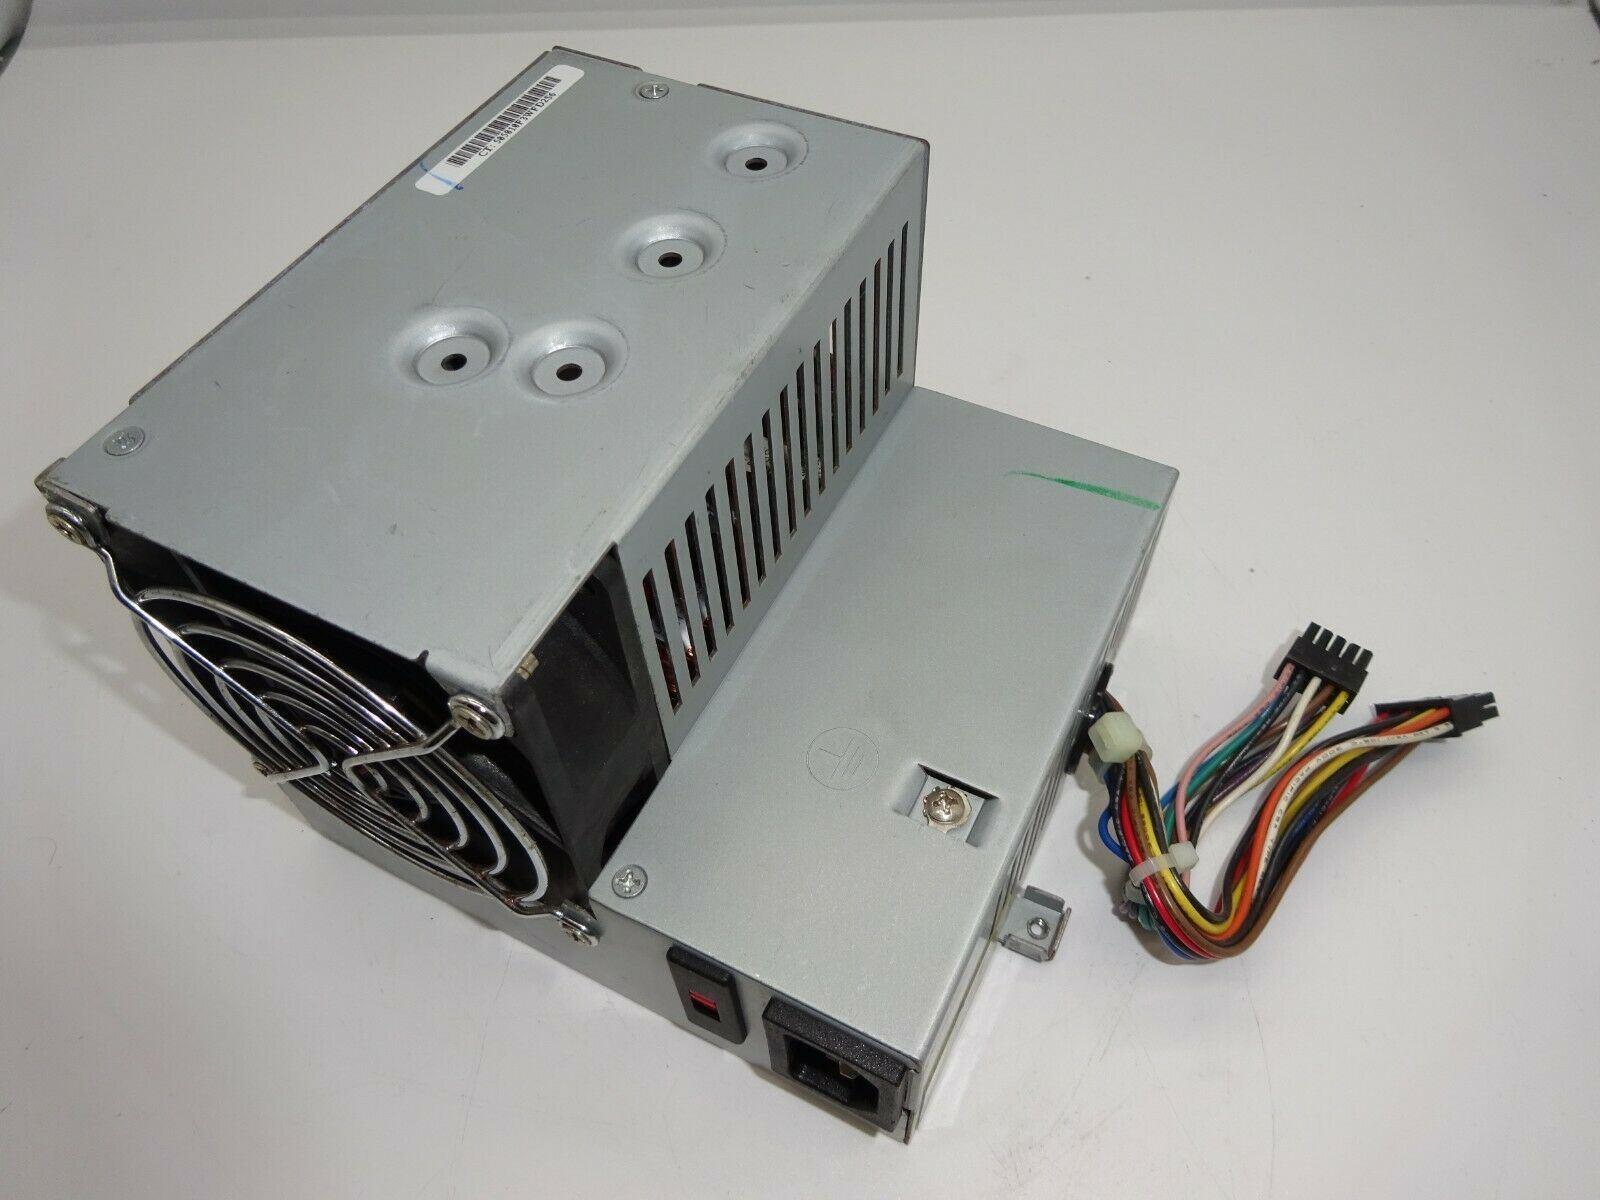 PS1015 220648 001 220649 001 ps 8181 1 hp ps 8181 1 147w power supply